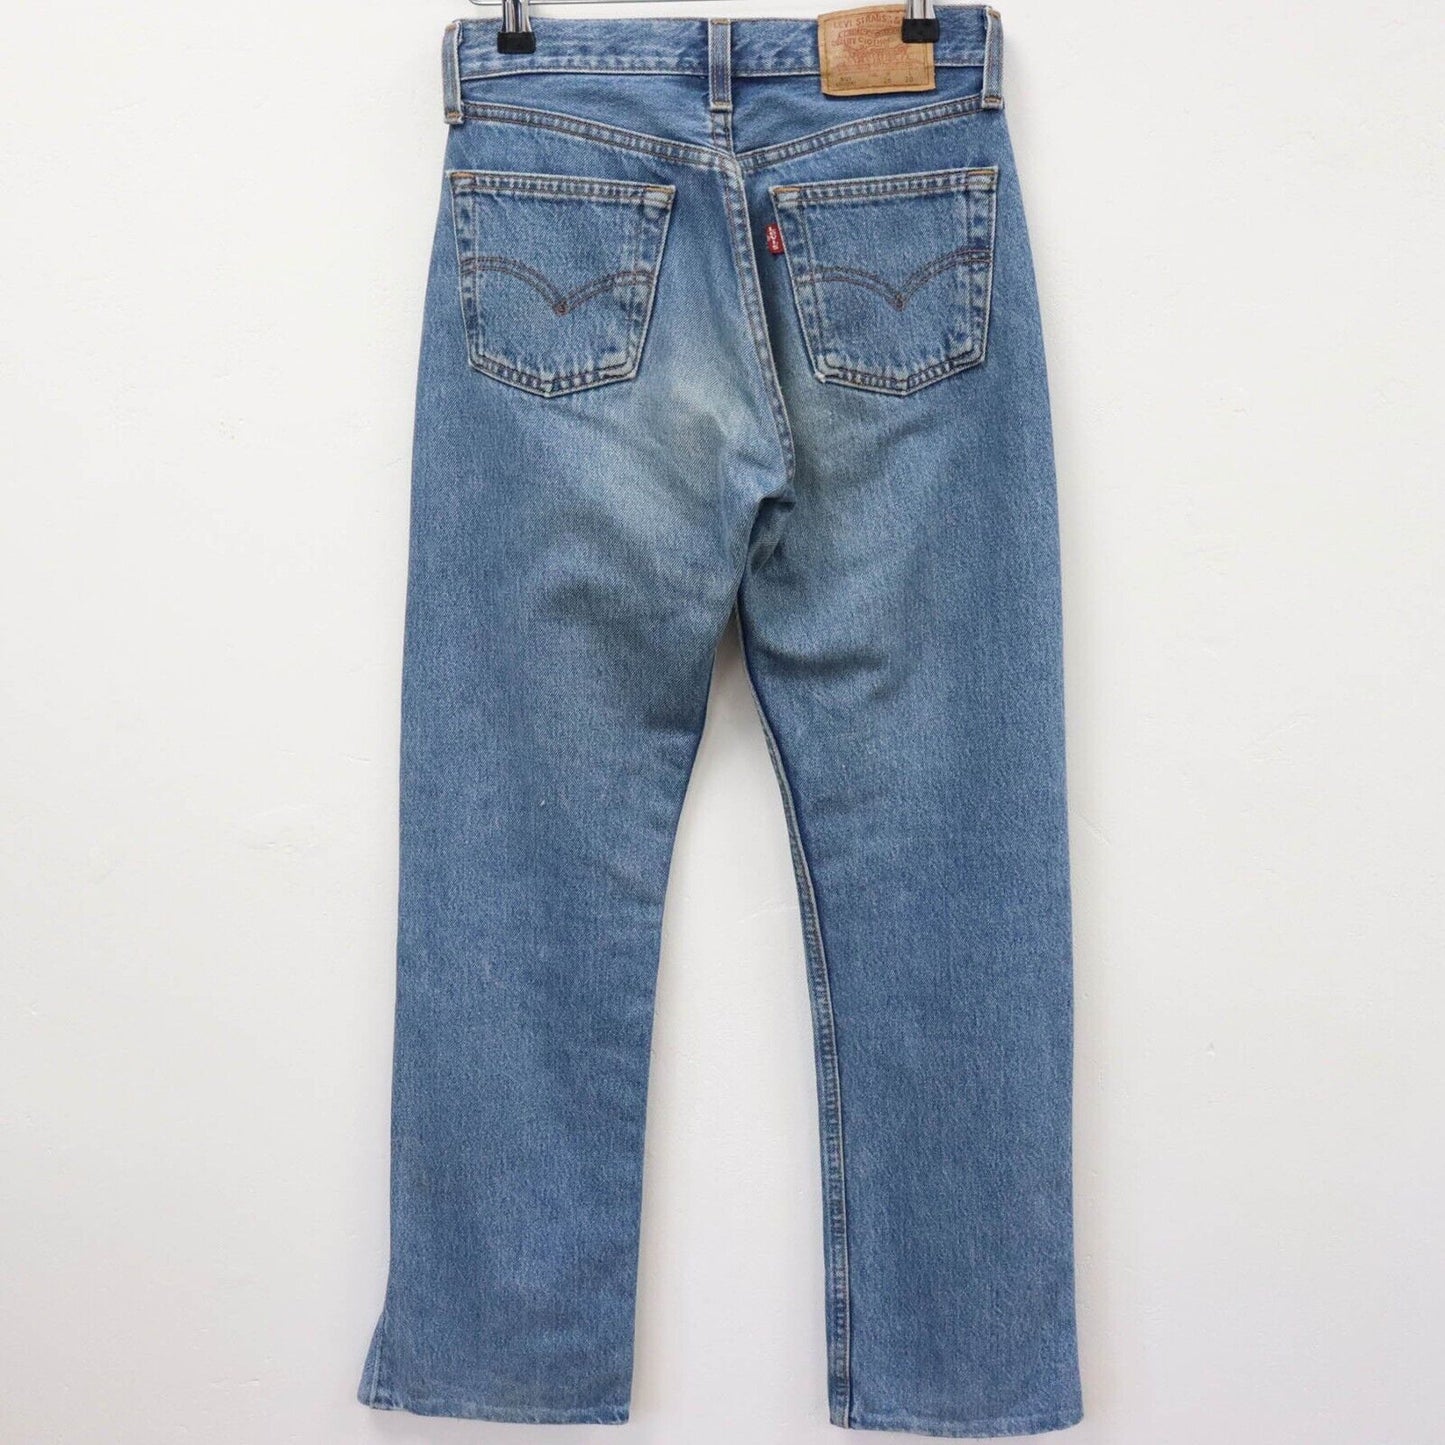 90s Levi’s 501 Upcycled Flare Jeans UK 8 W26 L29